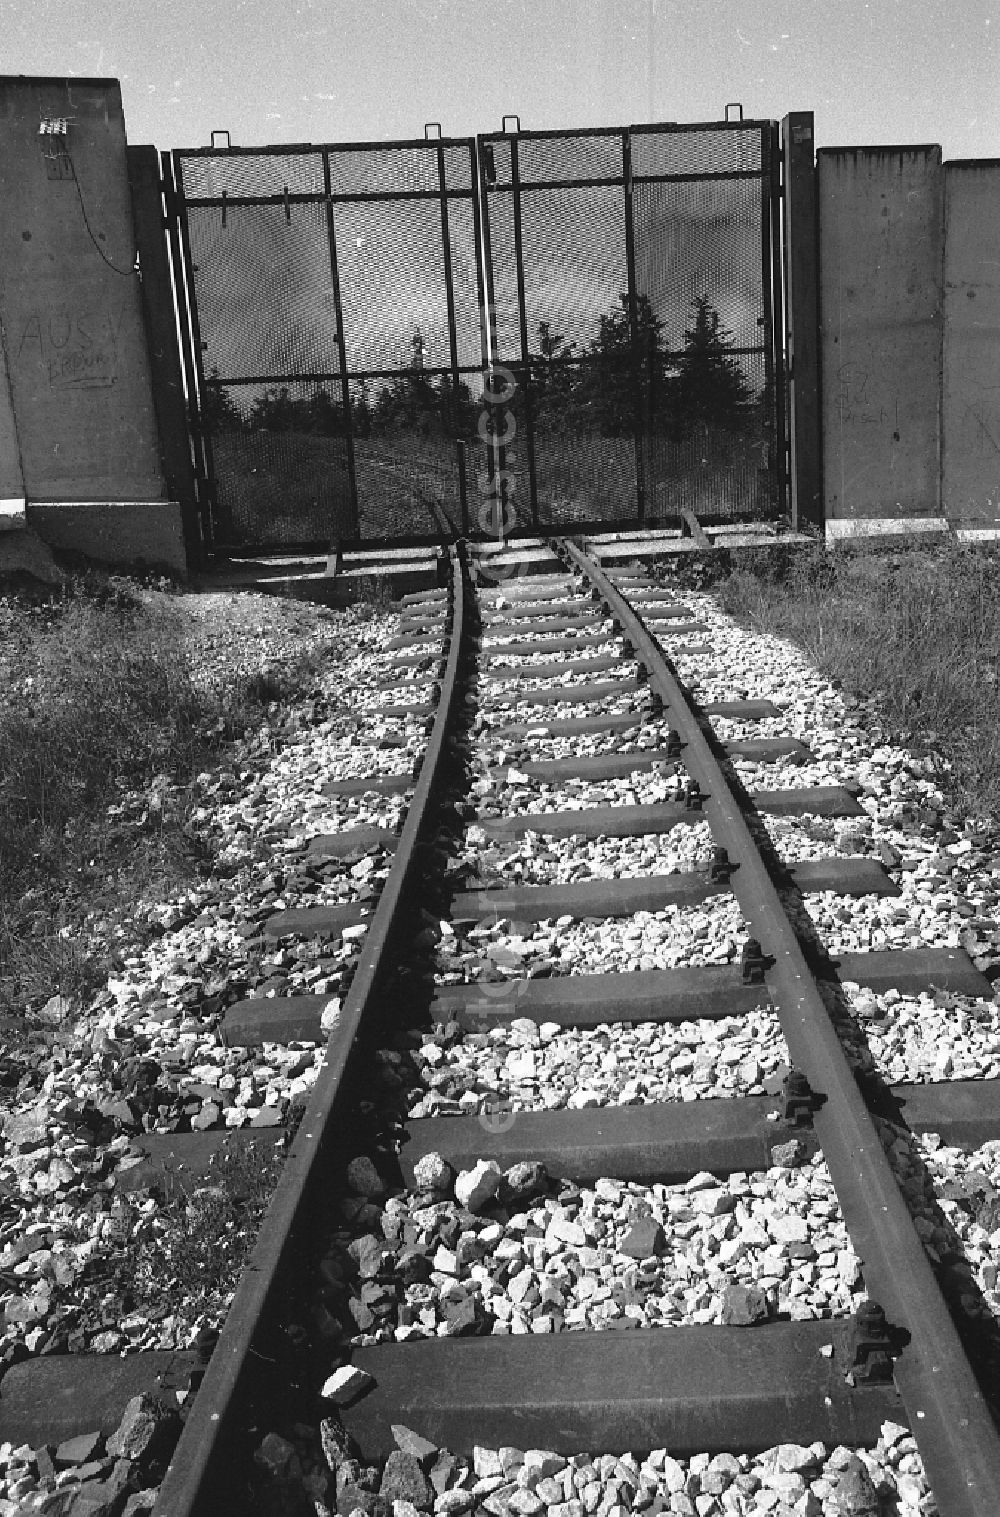 GDR photo archive: Schierke - Neglected track layout and track systems on the railway line on the summit plateau of the Brocken after its release for civilian visitor traffic in Schierke in the Harz in the state of Saxony-Anhalt in the area of the former GDR, German Democratic Republic